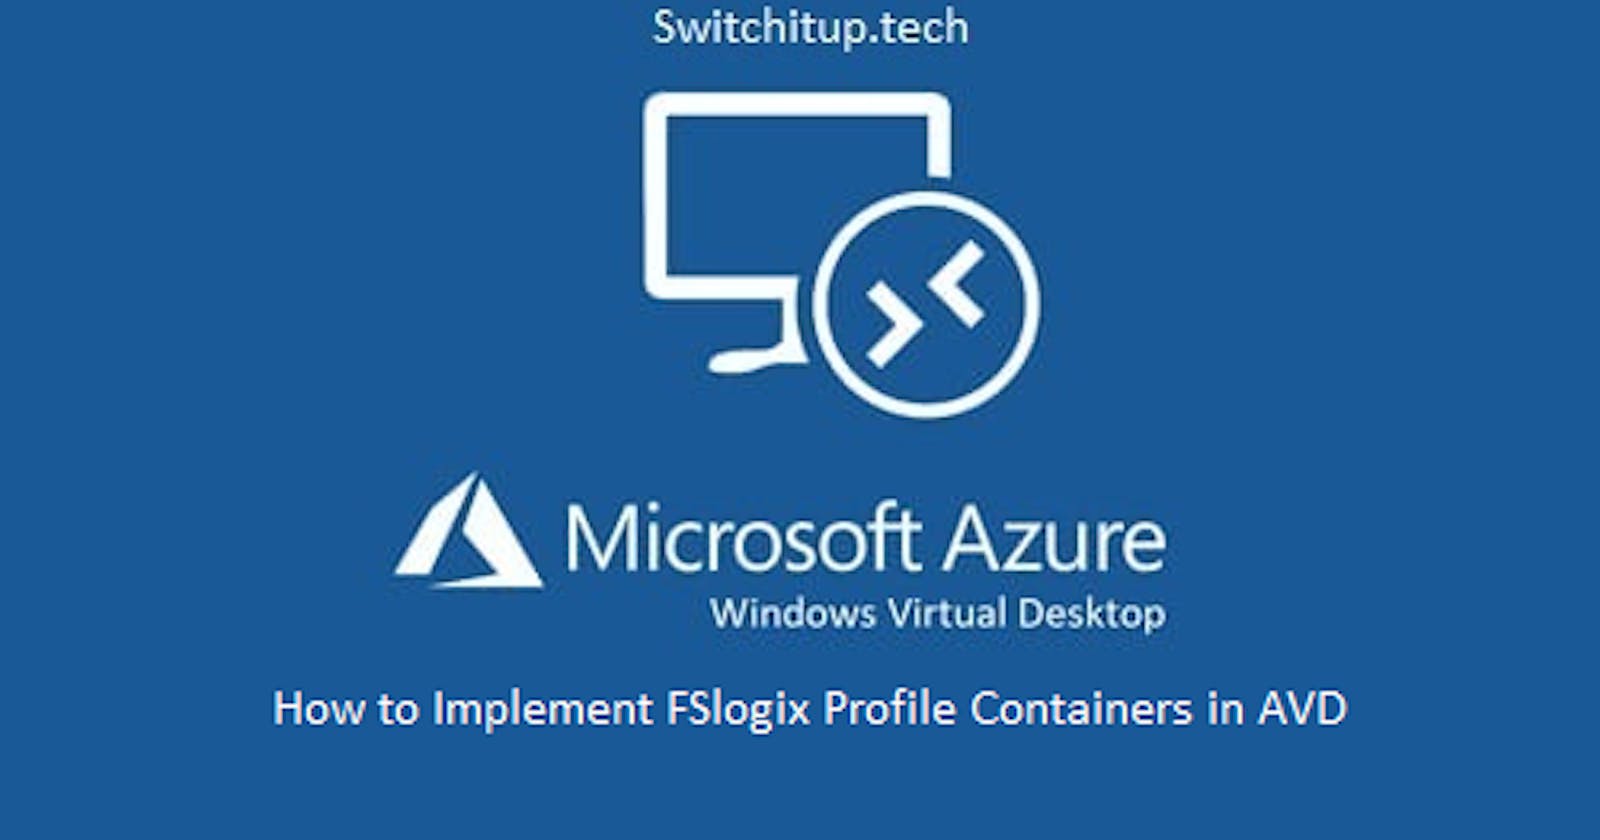 How to Implement FSLogix Profile Containers in AVD